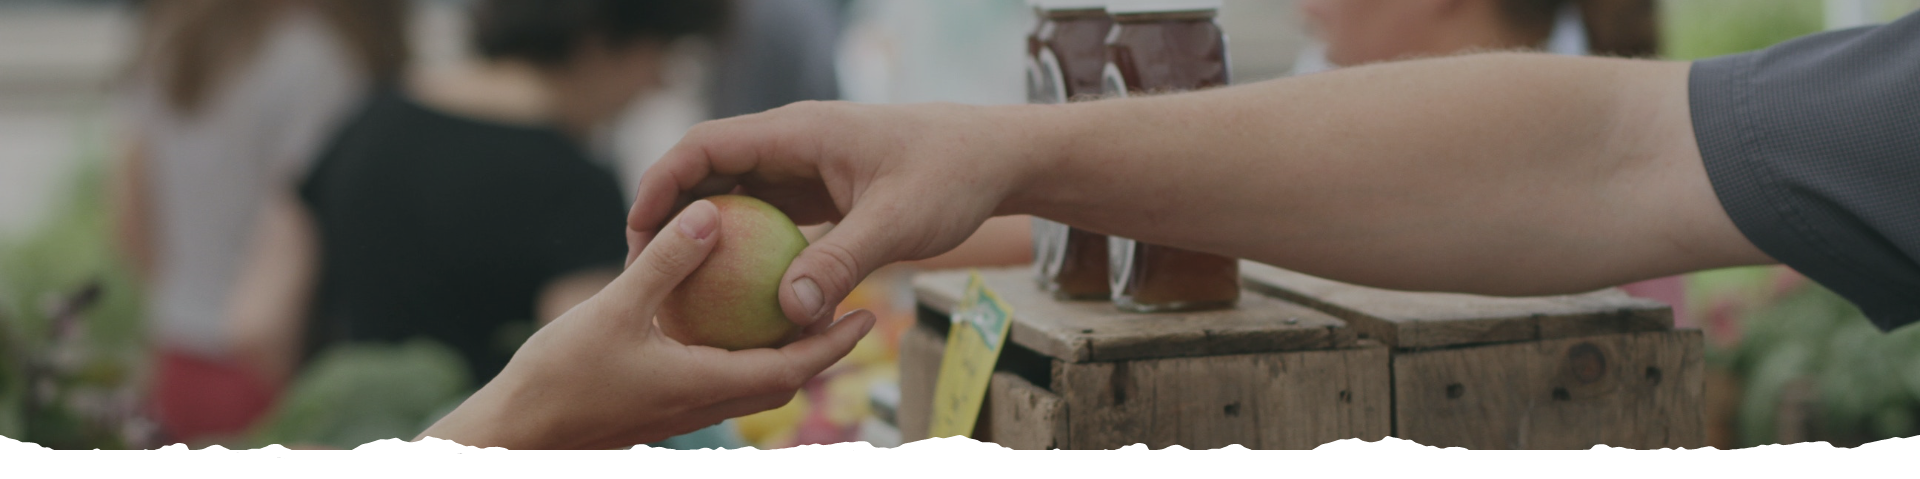 passing an apple to someone in a marketplace